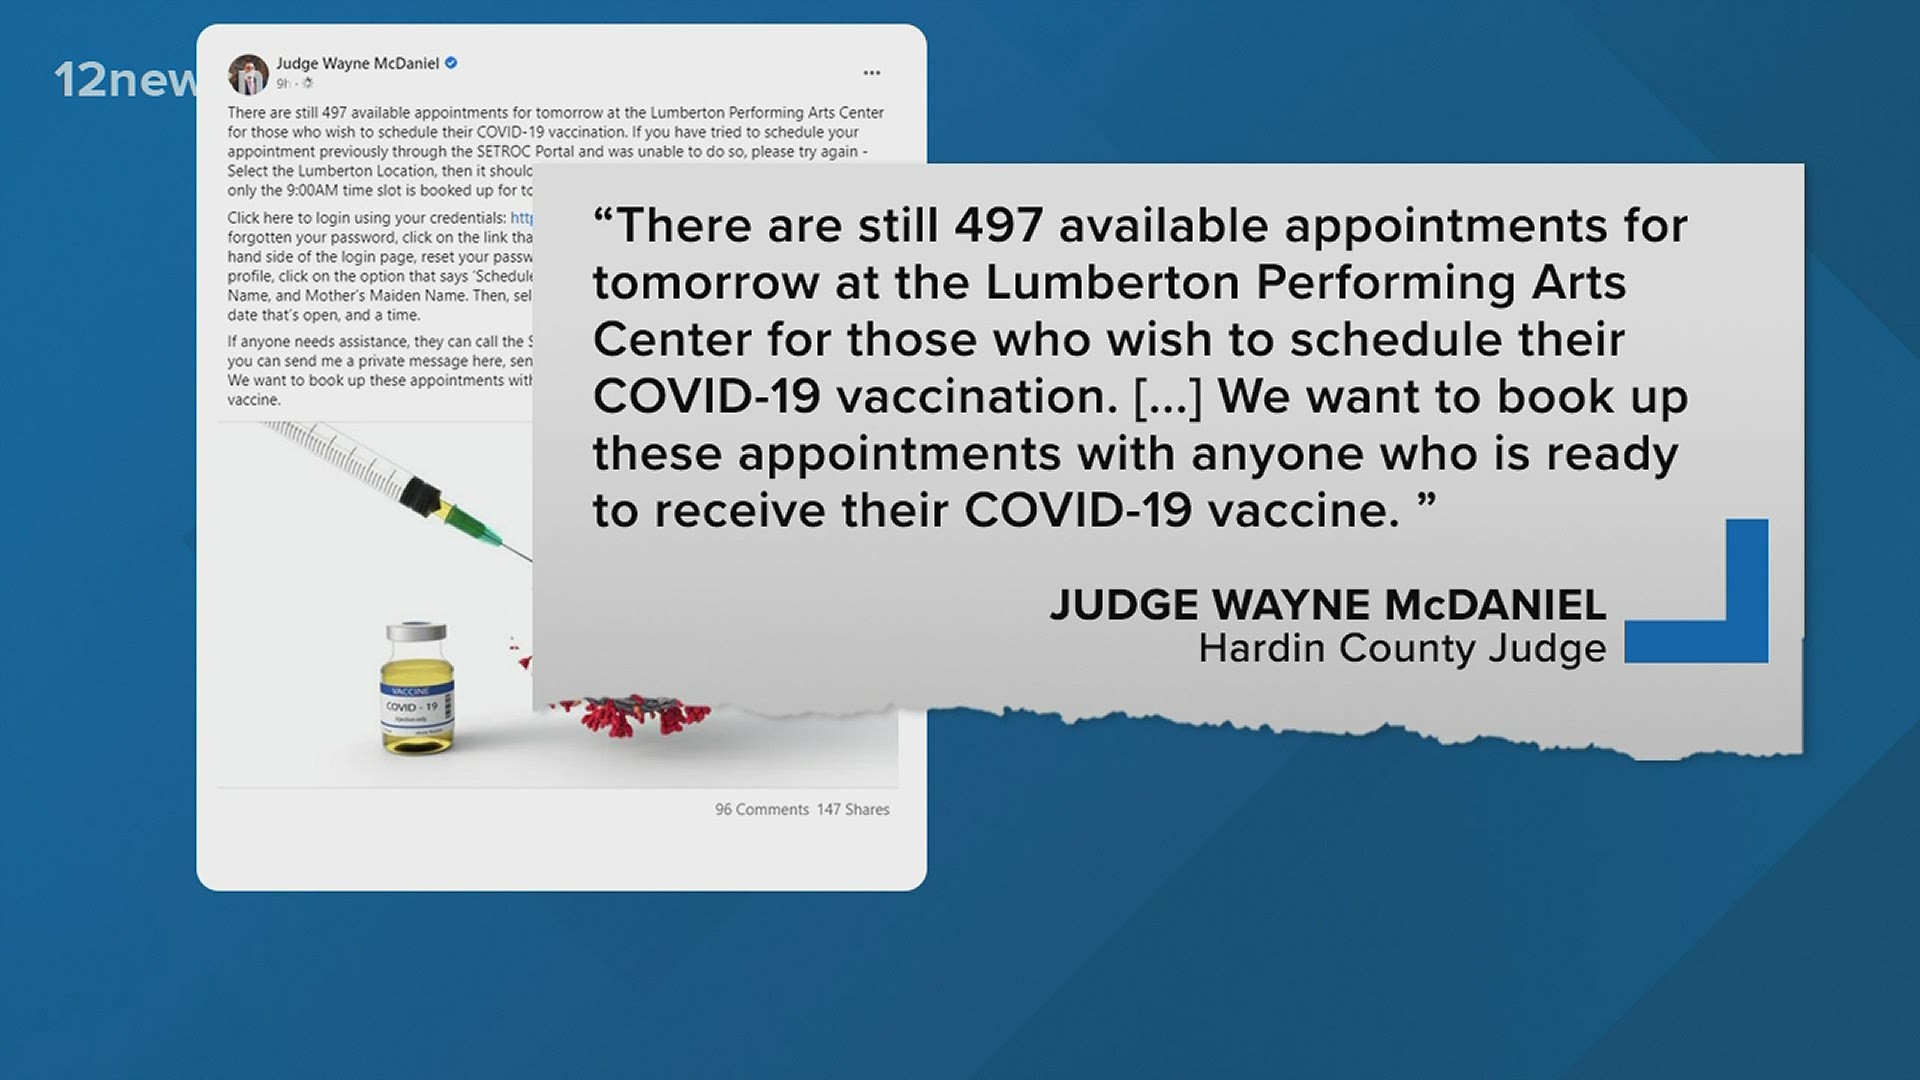 Hardin County Judge Wayne McDaniel said there are more vaccines than people signed up for appointments. "I don't want the vaccines to sit on the shelves," he said.